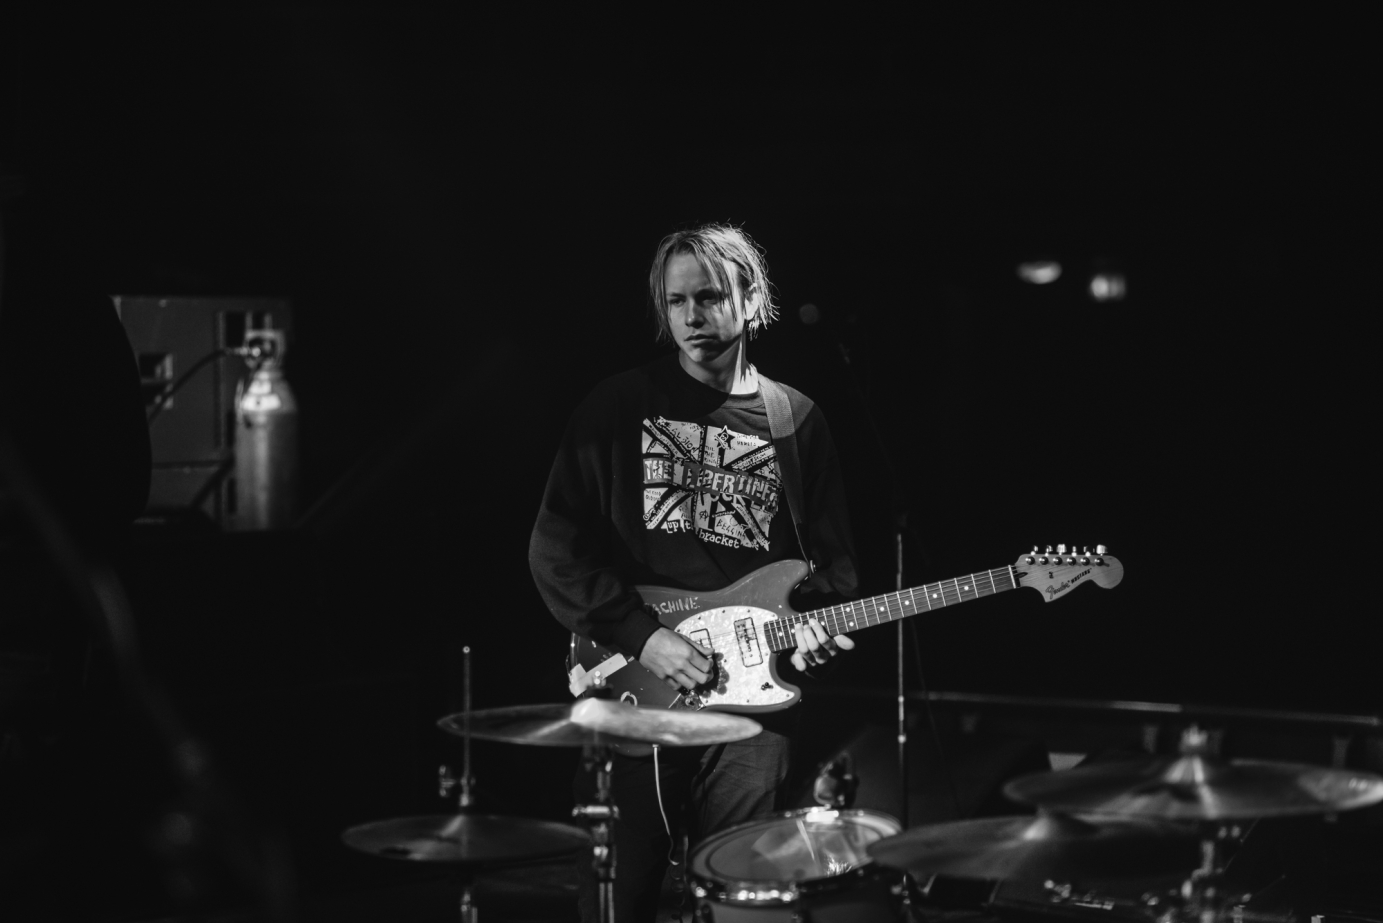 Photography for SWMRS by Andy Sawyer